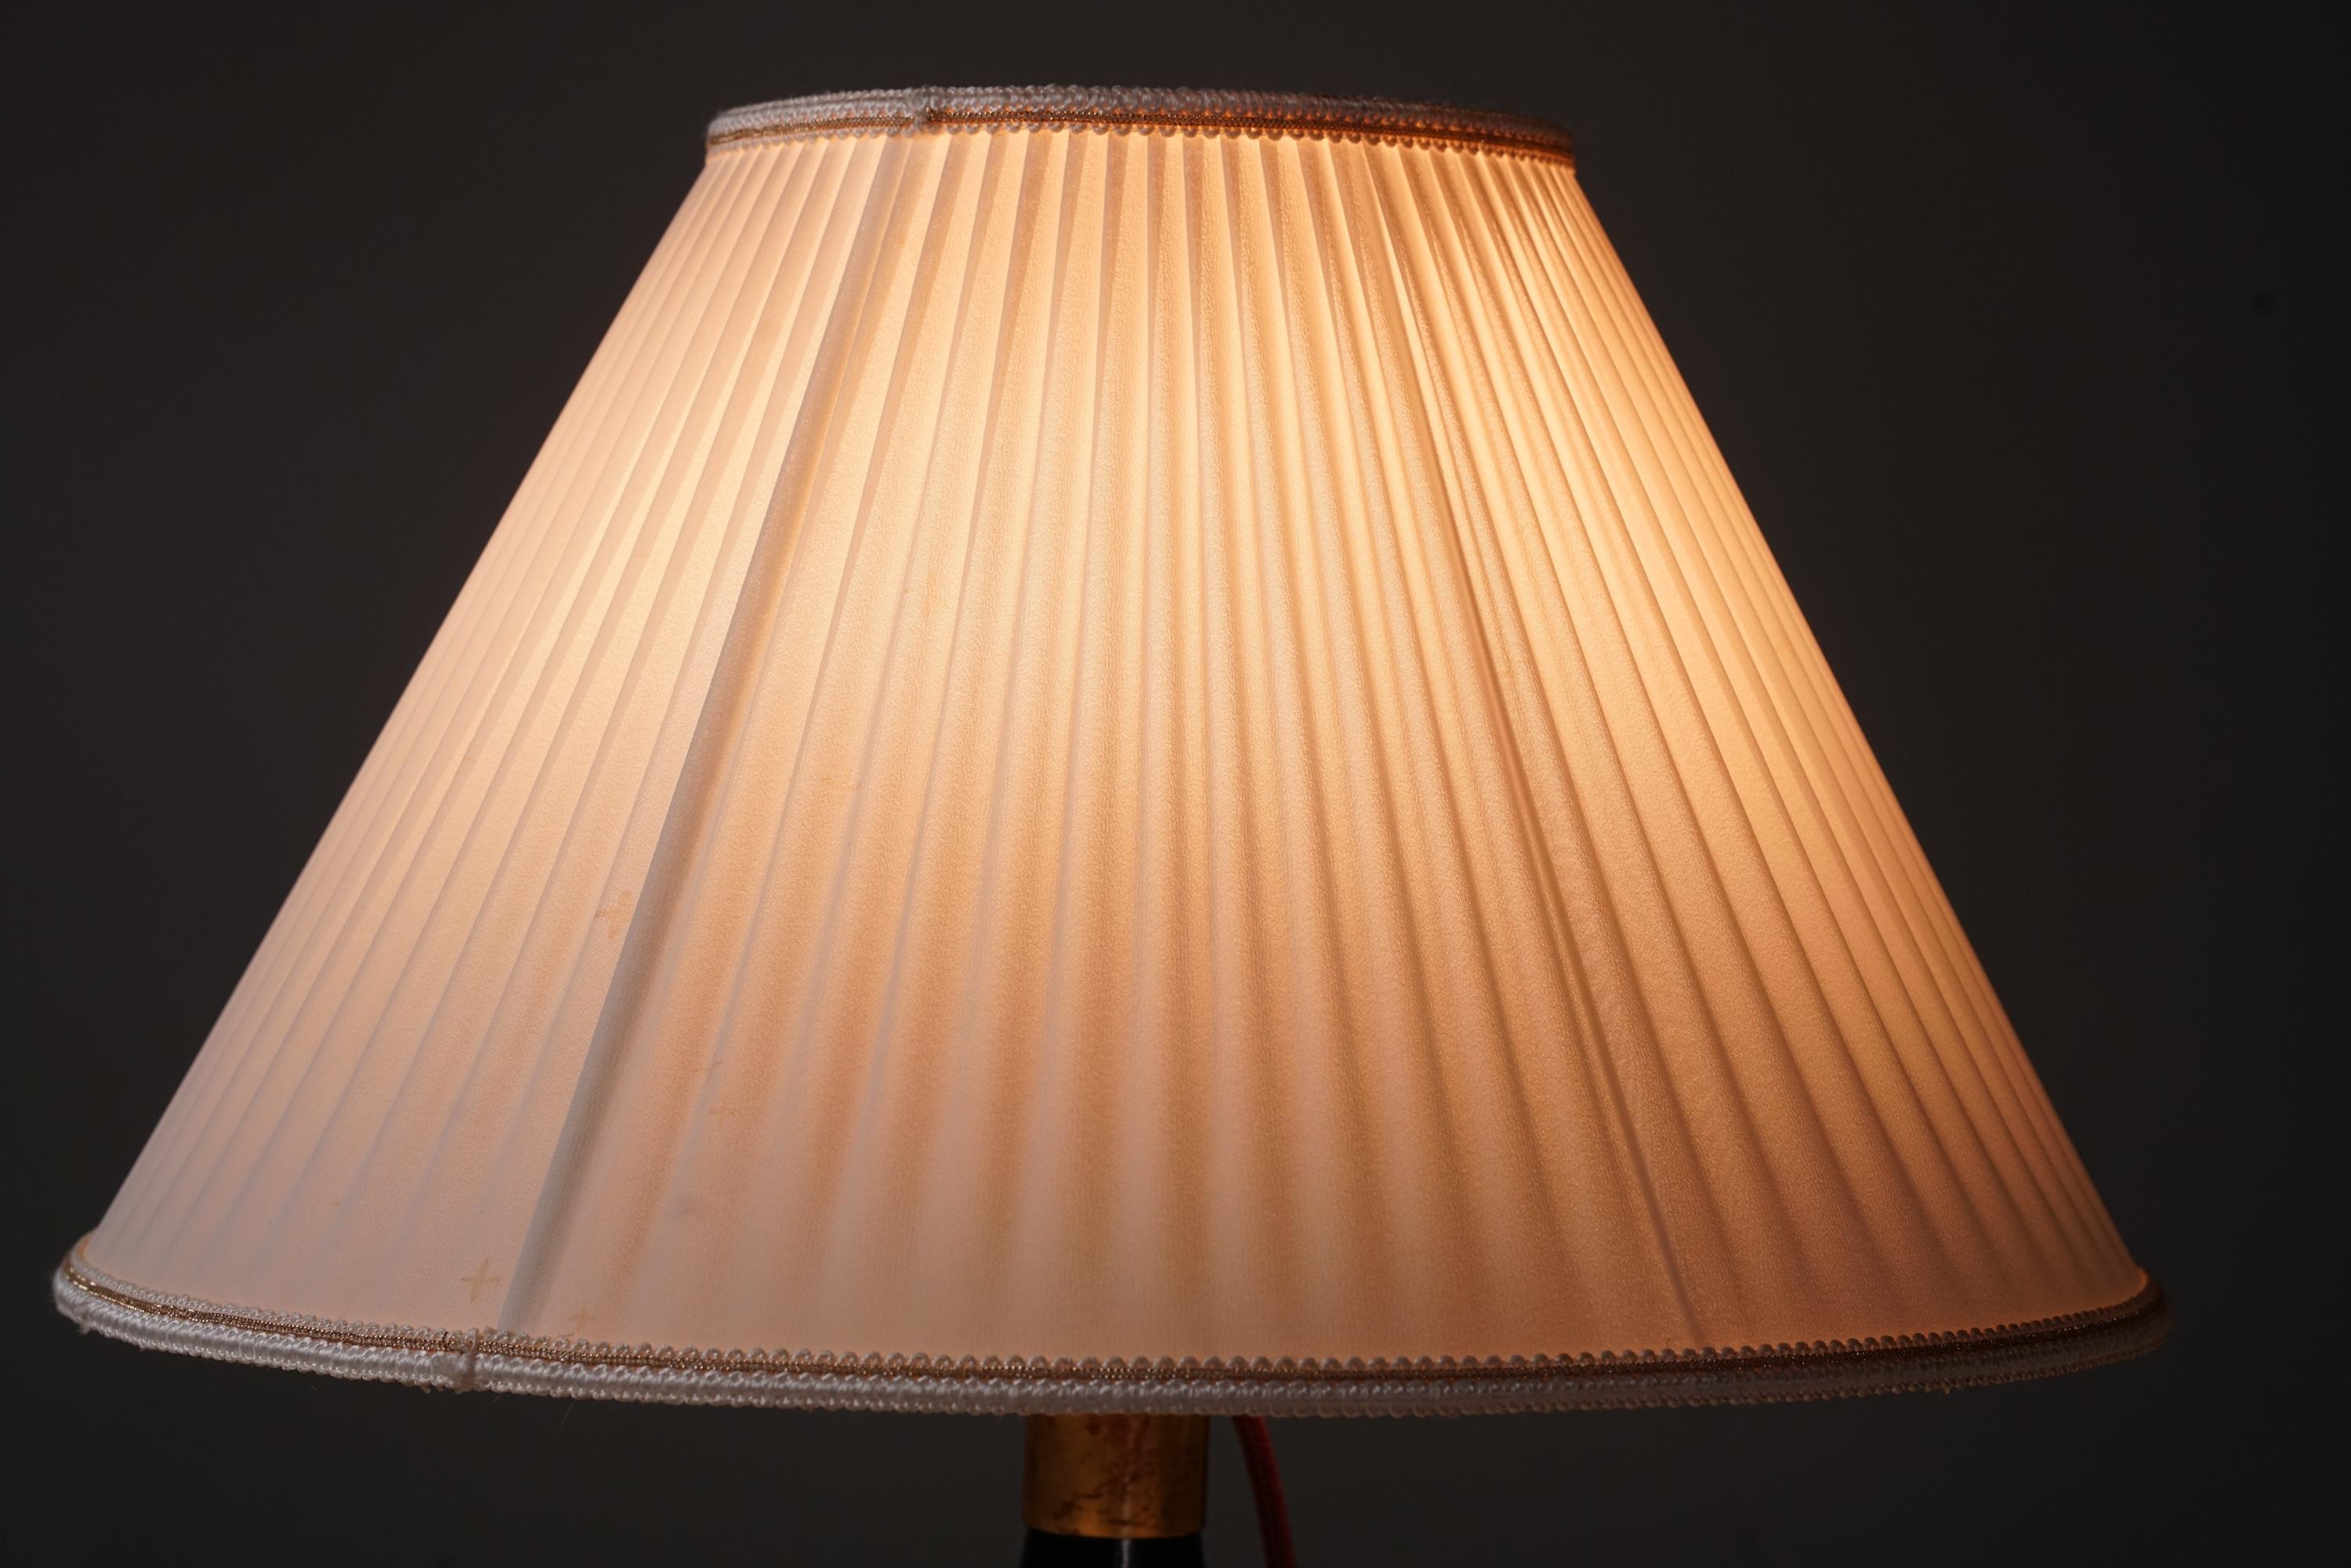 Glass Table Lamp, Gunnel Nyman, Idman Oy, 1940/1950s For Sale 2